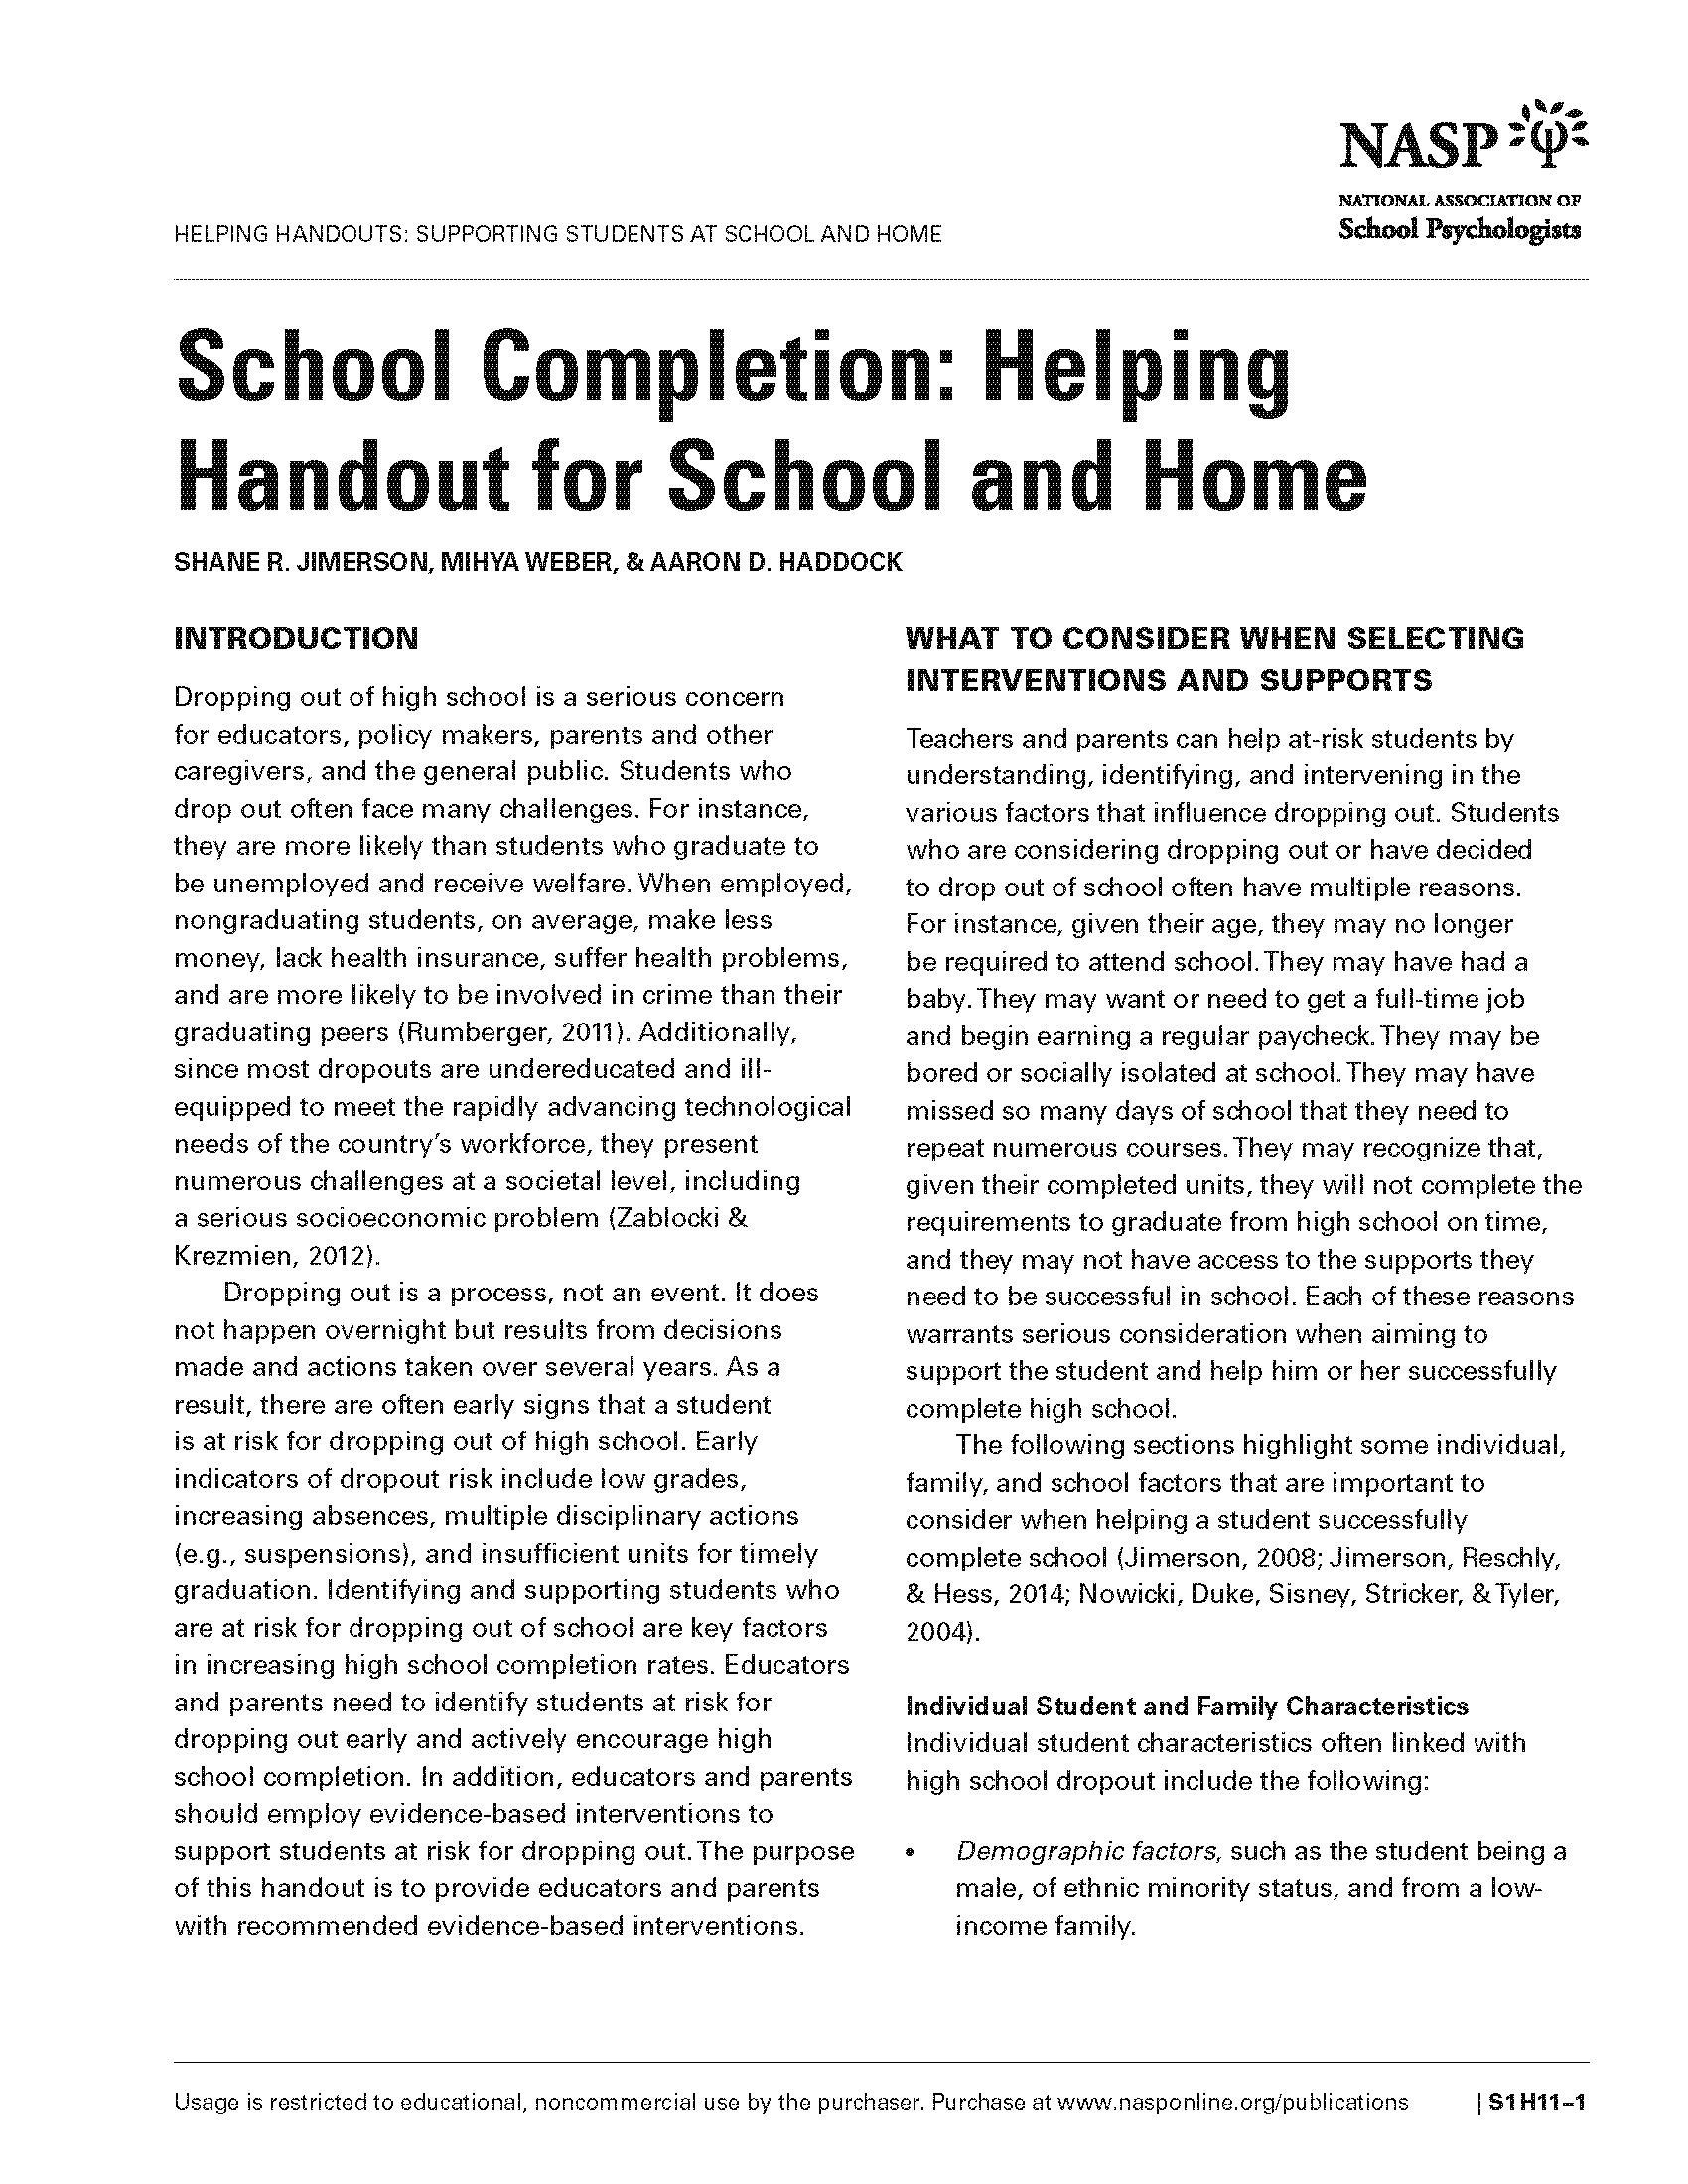 School Completion: Helping Handout for School and Home